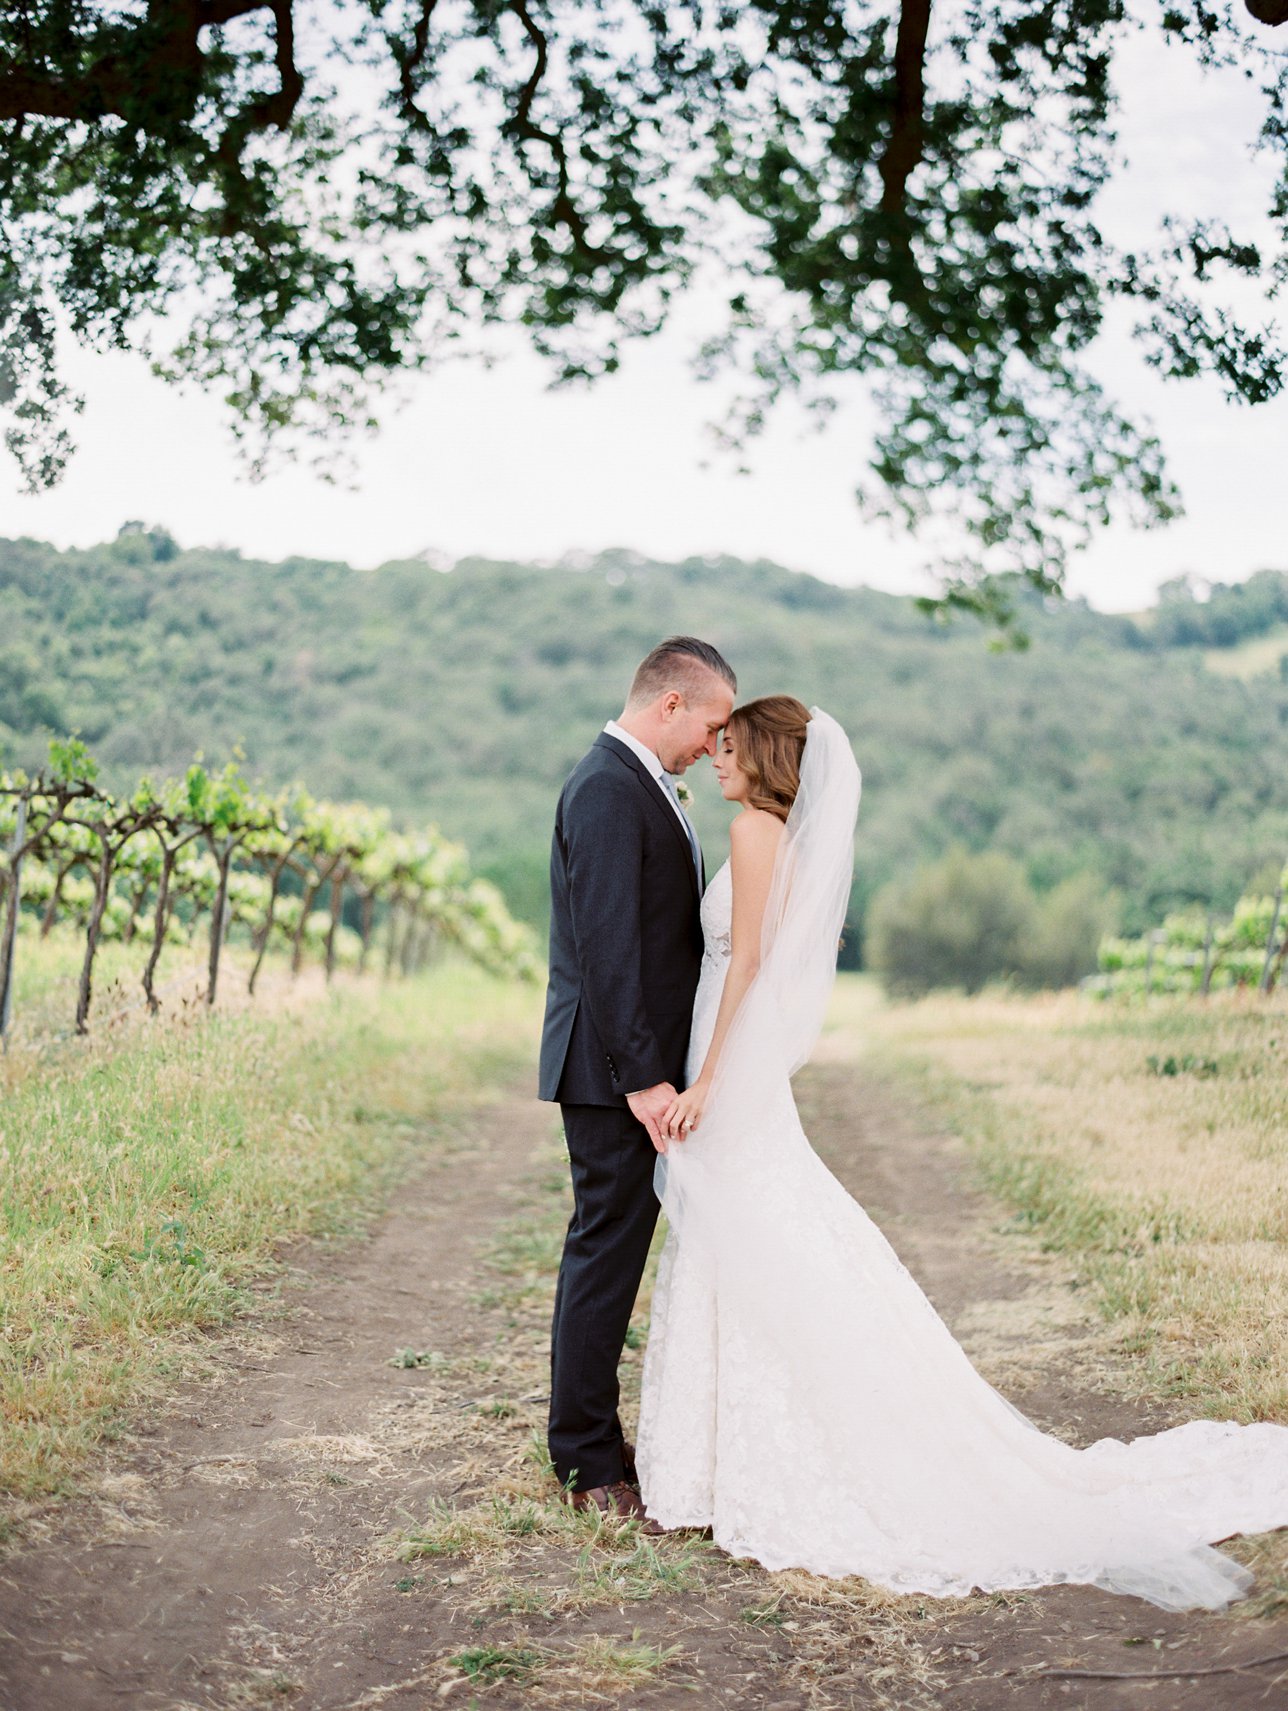 HammerSky Vineyards wedding photos - Paso Robles Wedding Photographer | Rachel Solomon Photography_9039